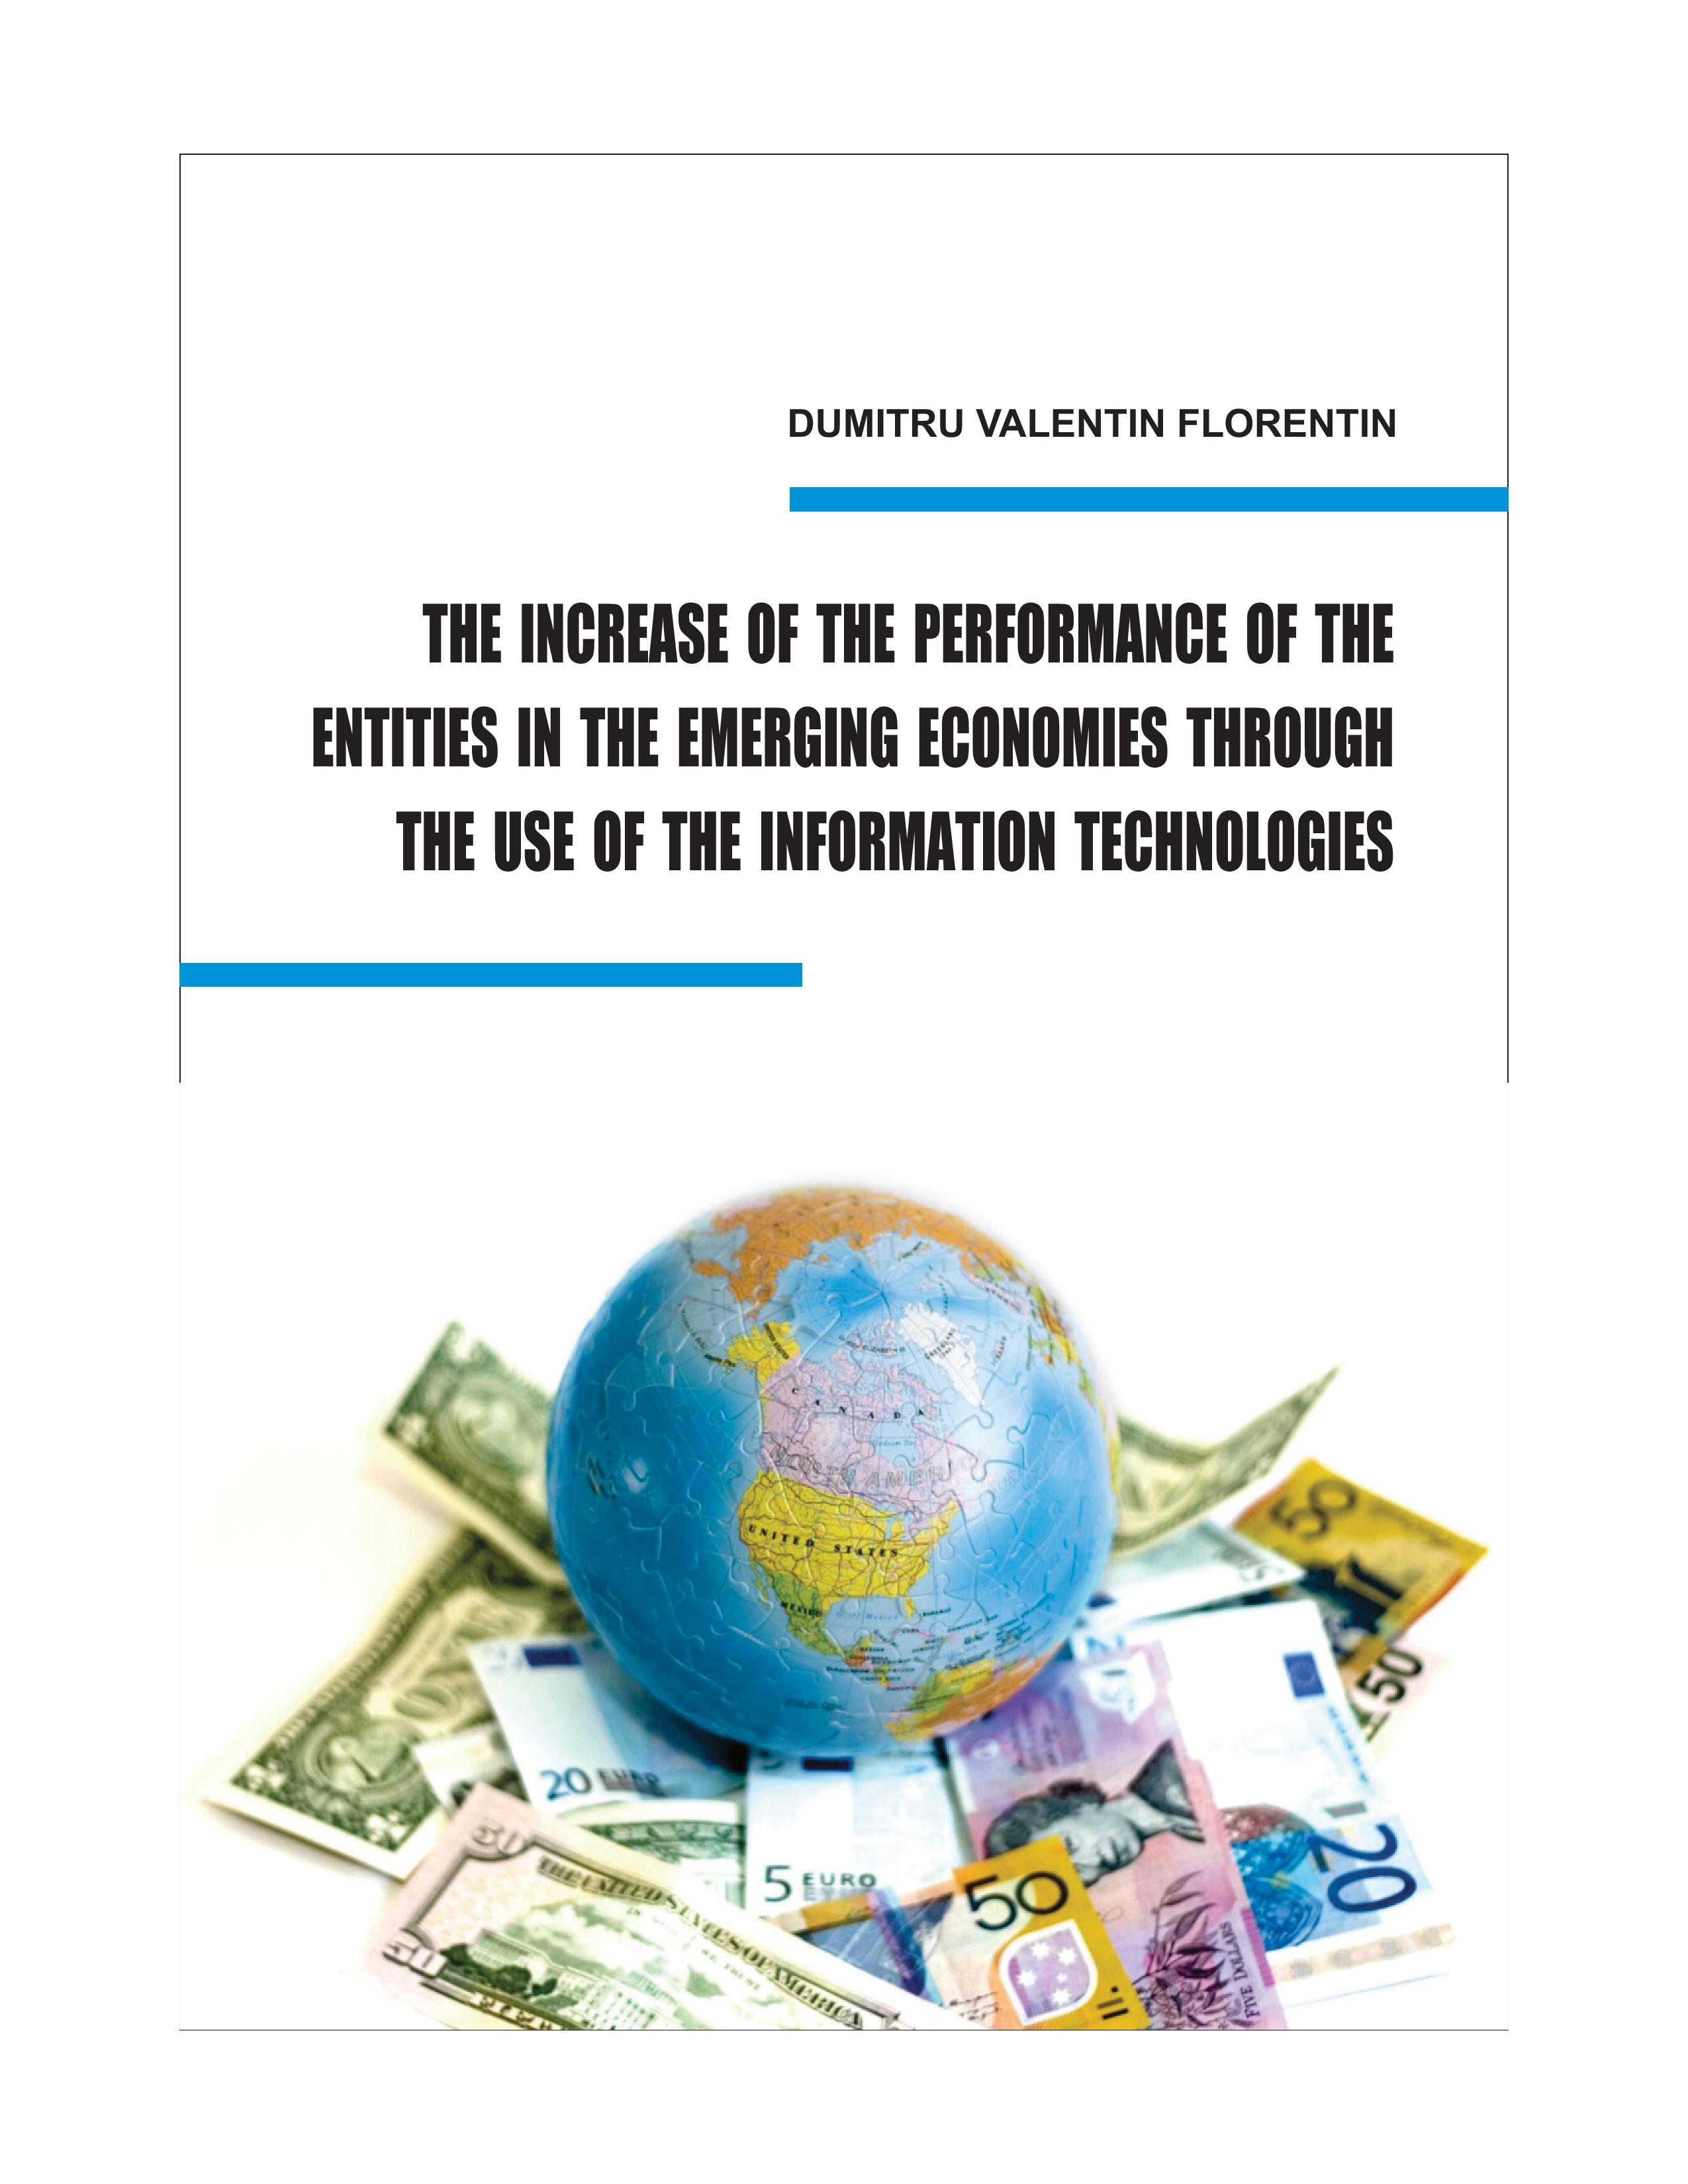  THE INCREASE OF THE PERFORMANCE OF THE ENTITIES IN THE EMERGING ECONOMIES THROUGH
THE USE OF THE IT